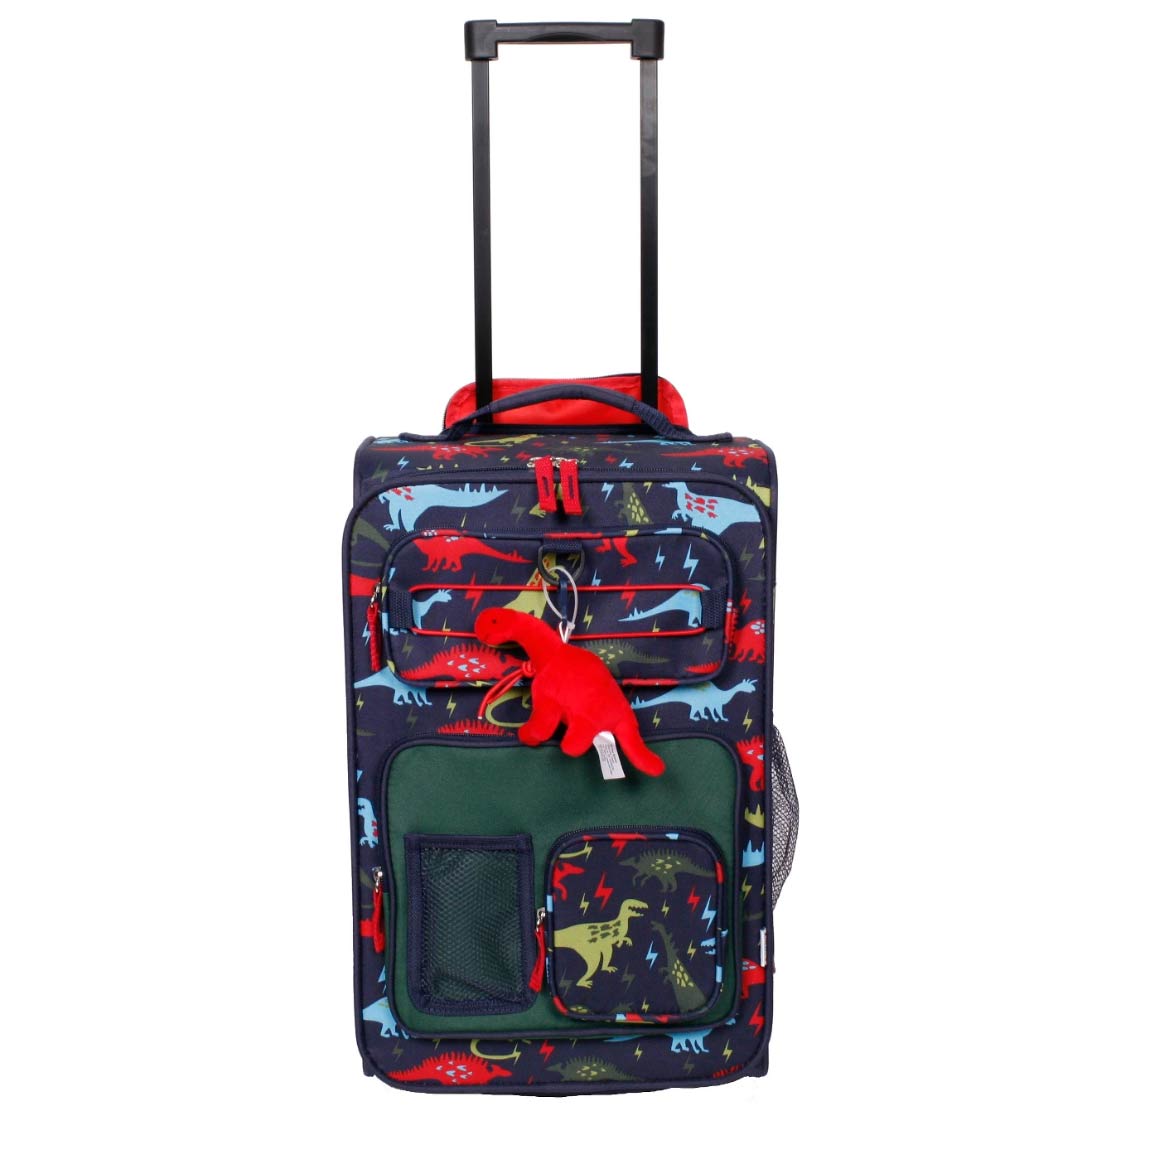 Crckt 18” Kids Carry-On Suitcase